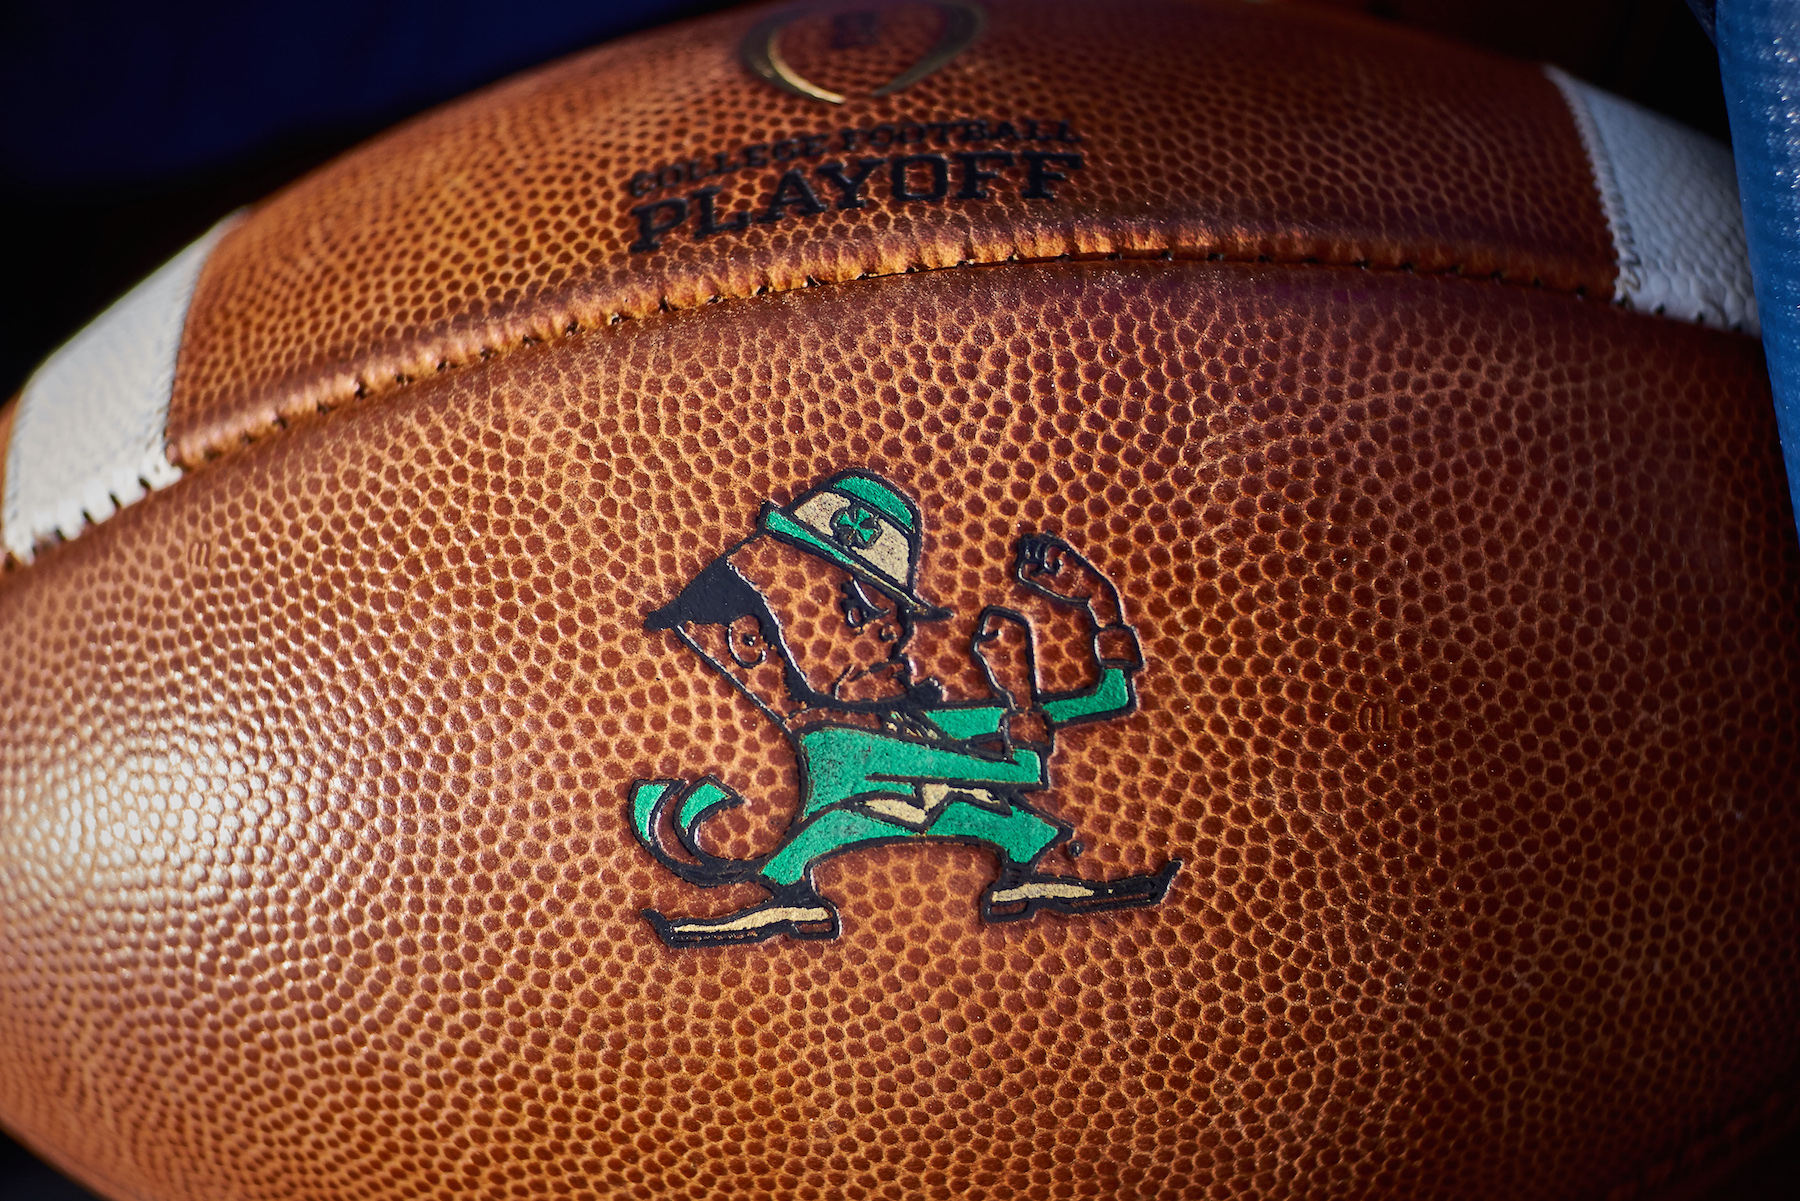 A detailed view of a Notre Dame Fighting Irish Wilson football with the Fighting Irish logo is seen around some equipment during the Notre Dame Fighting Irish Blue-Gold Spring Game on April 22, 2017, at Notre Dame Stadium in South Bend, IN.  (Photo by Robin Alam/Icon Sportswire via Getty Images)